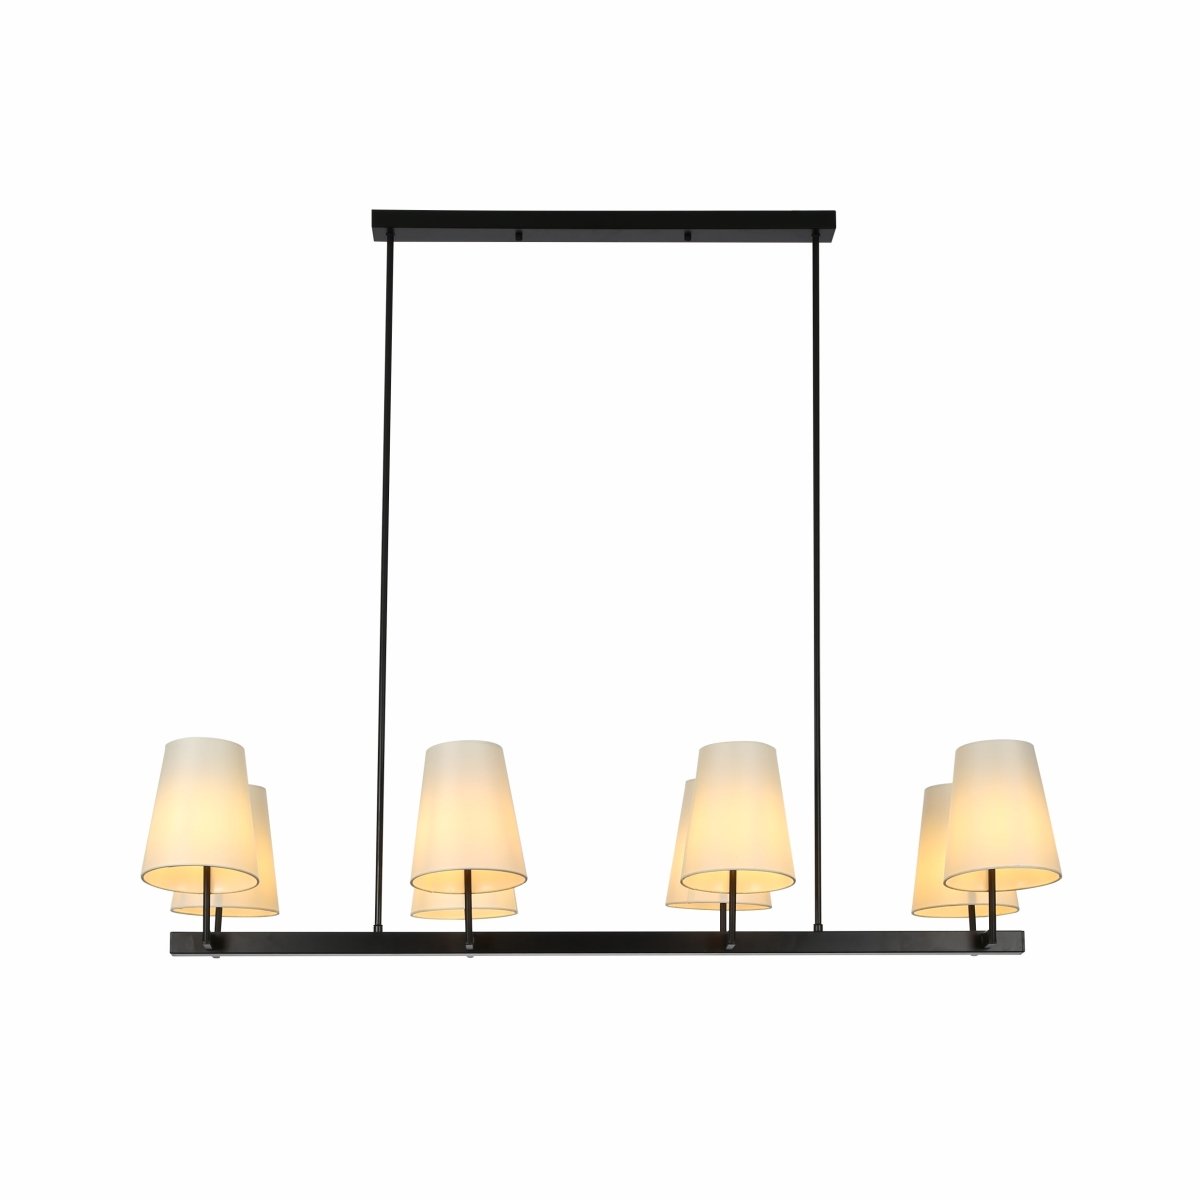 Main image of Beige Fabric Shade Black Metal Body Island Chandelier with 8xE14 Fitting | TEKLED 159-17558